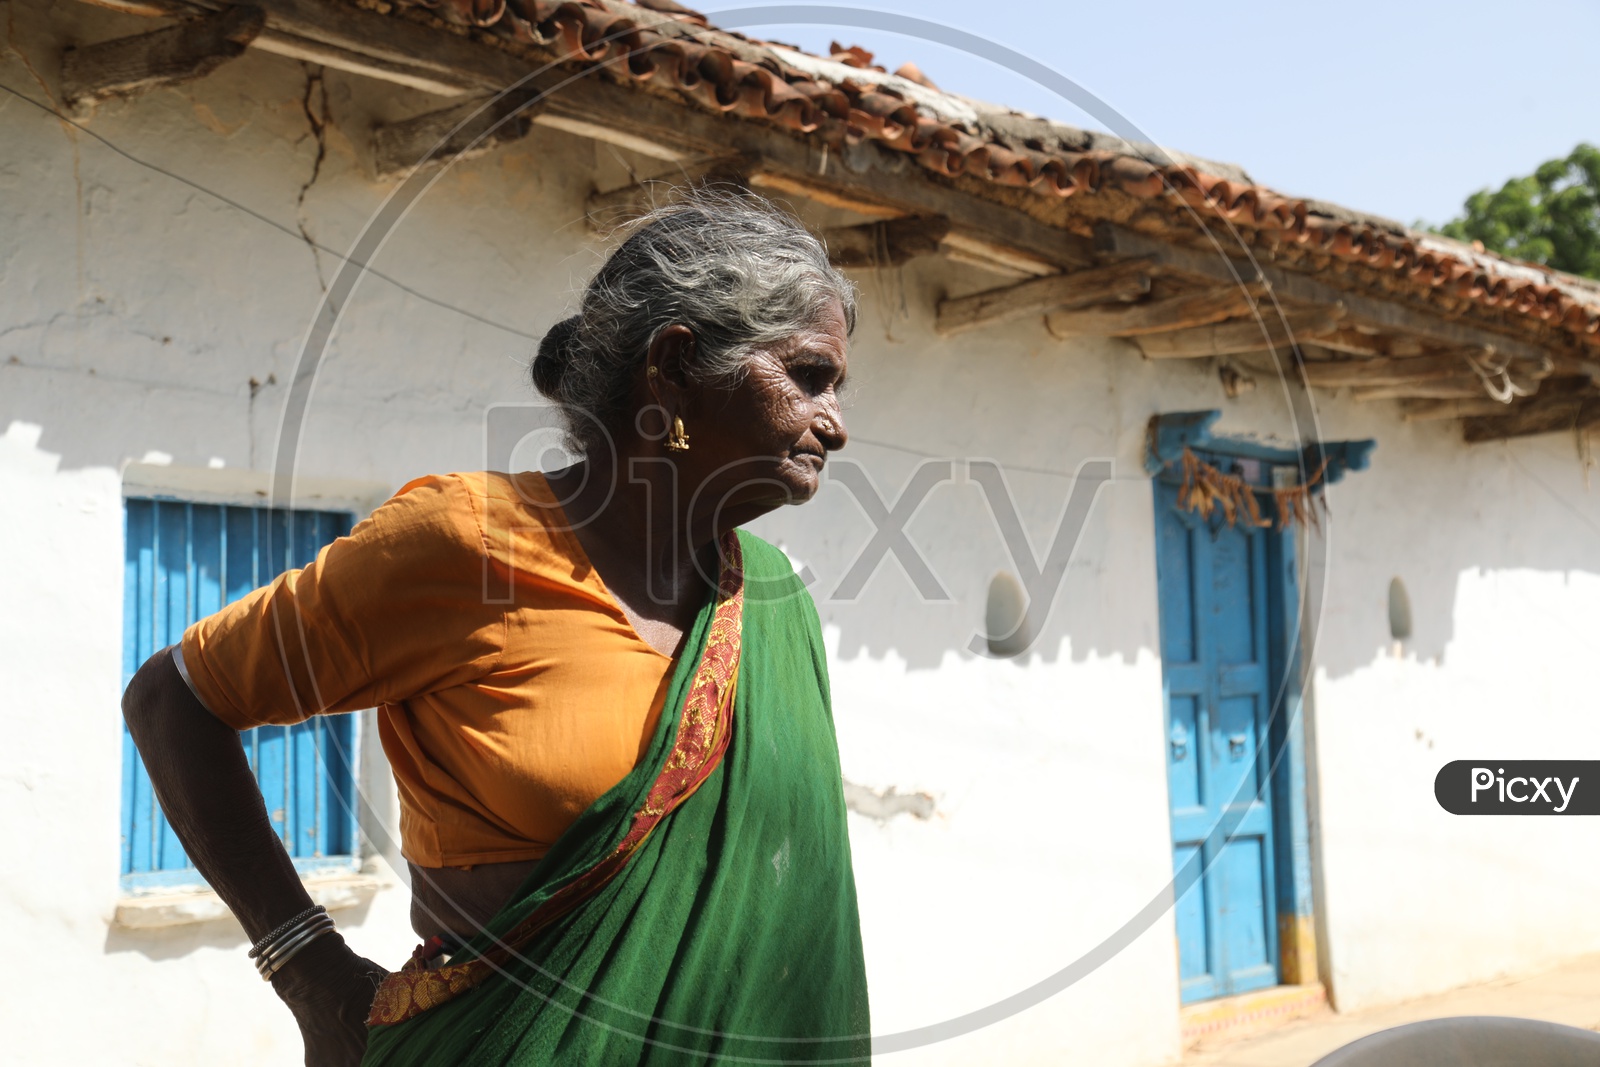 An Old Woman  of a Rural Village  at Her House Premise